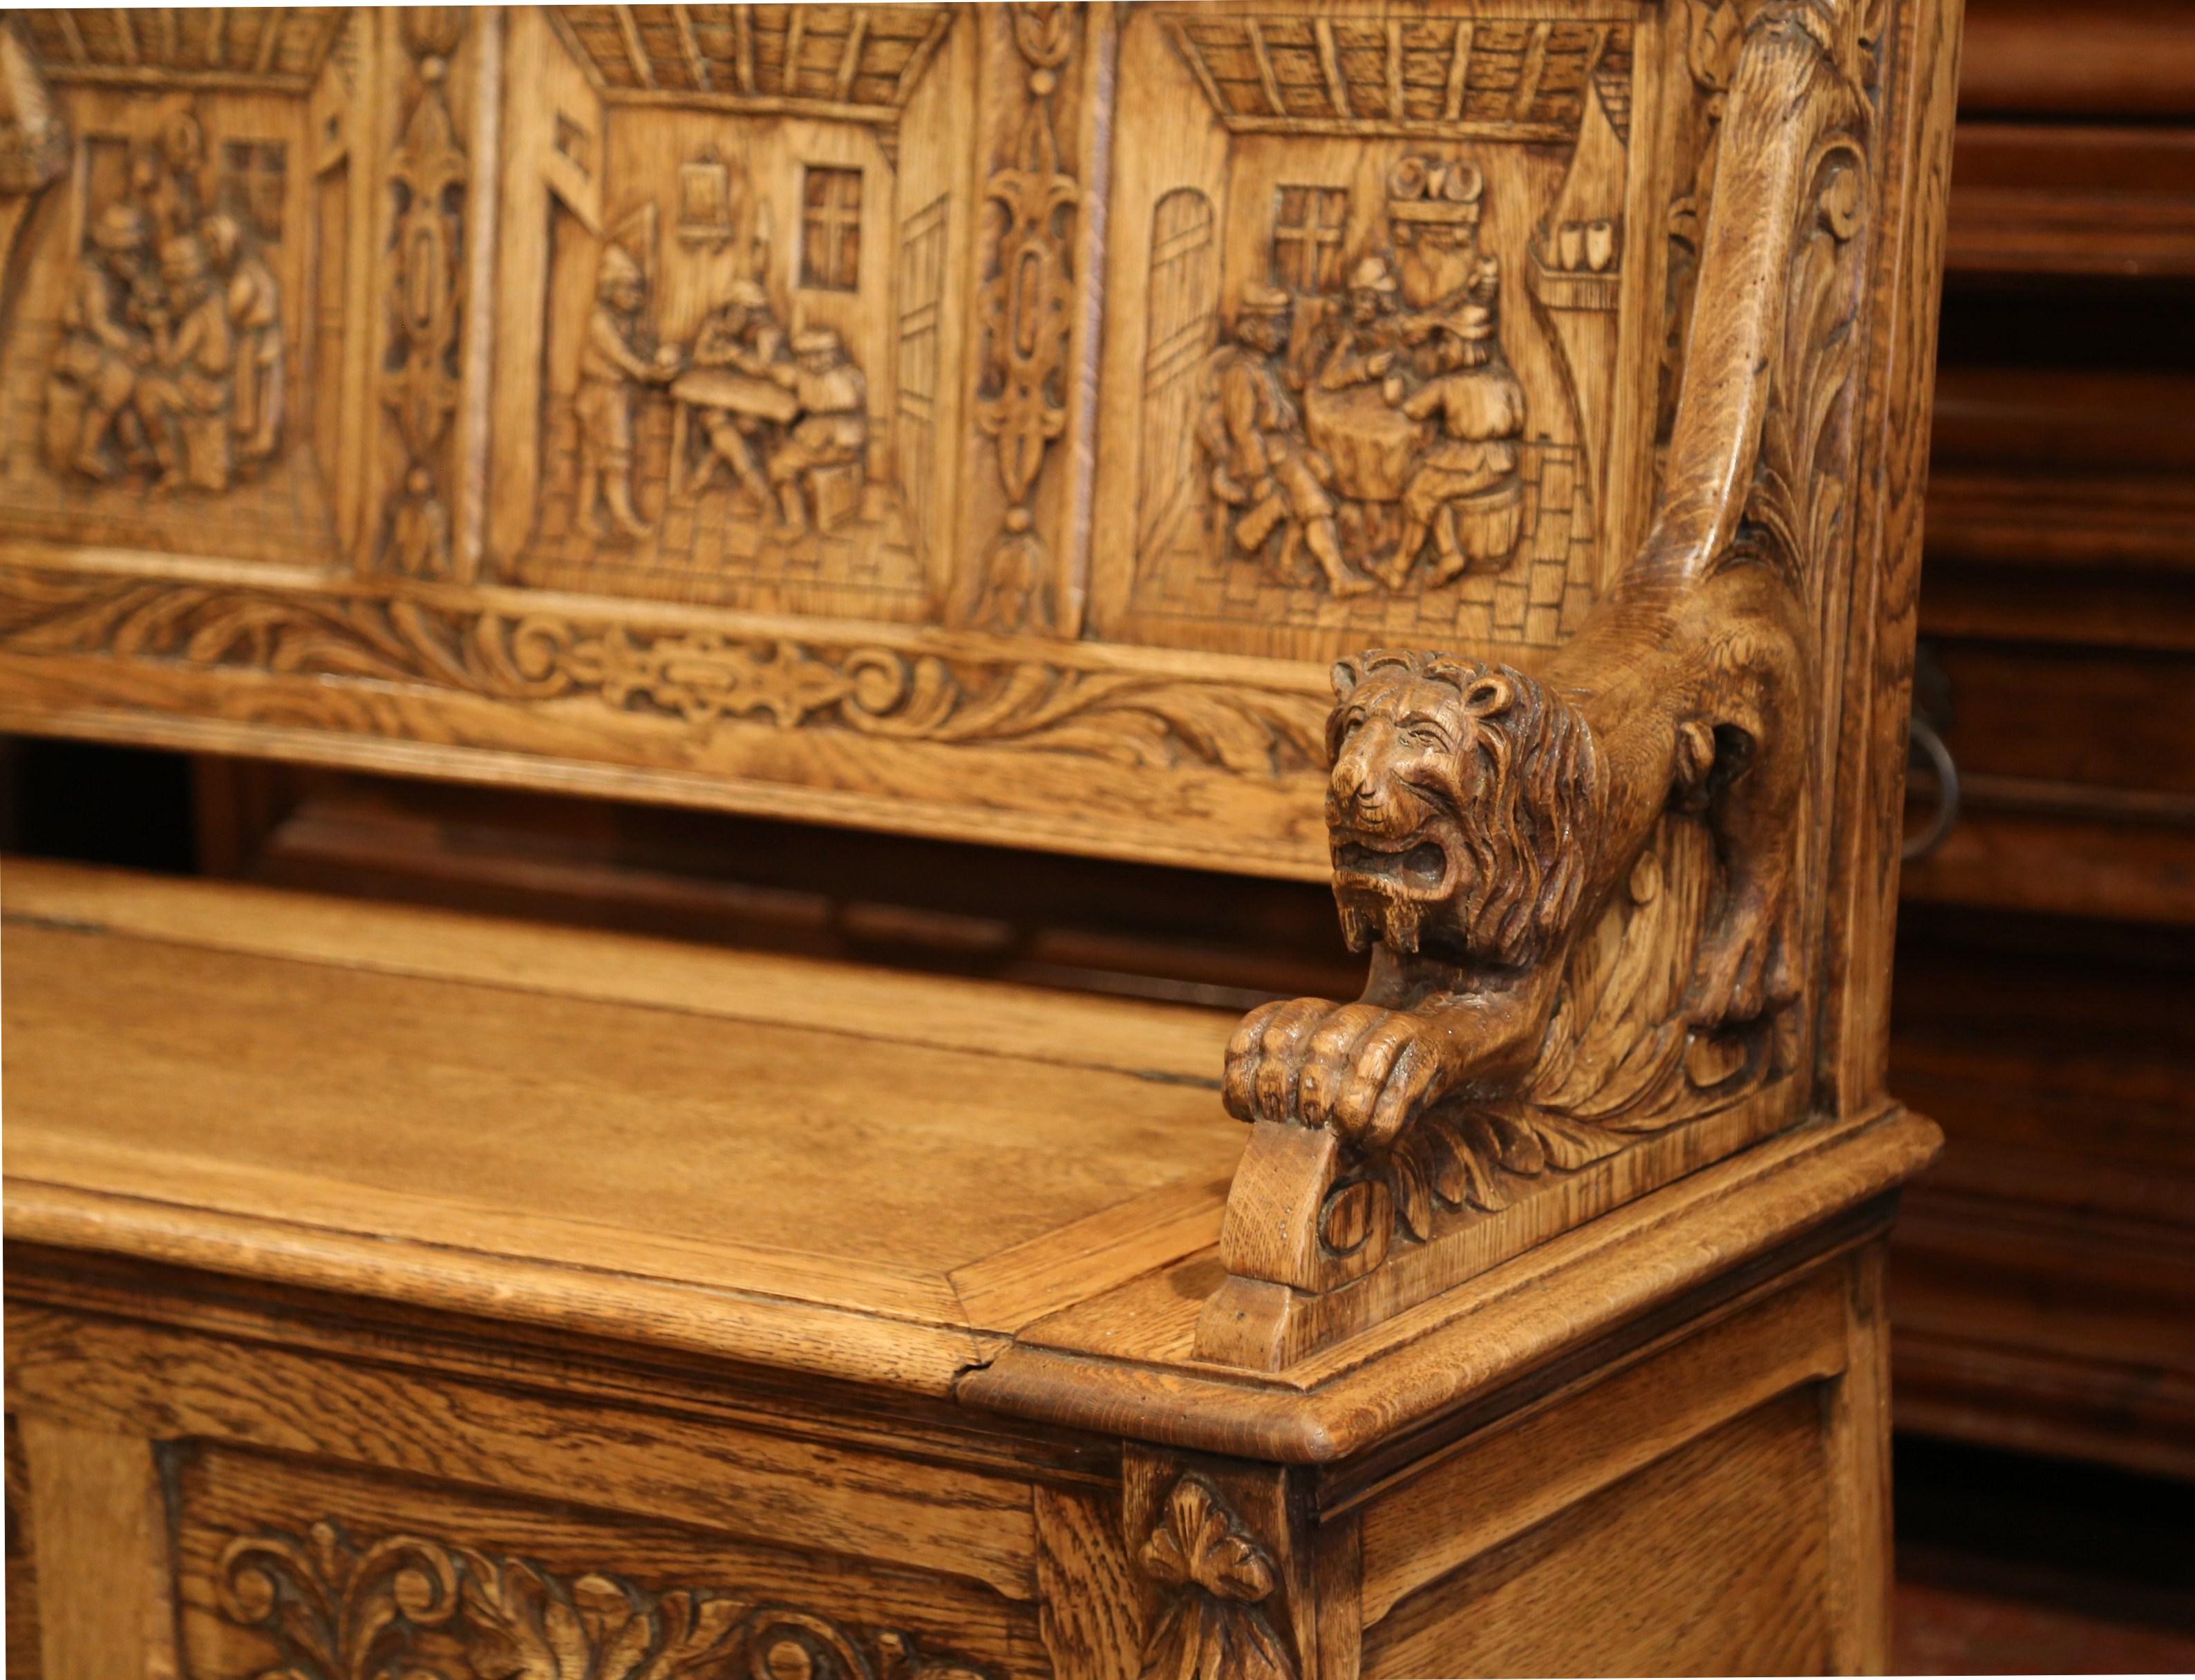 Compliment your entryway or mud room with this heavily carved Louis XIII bench. Crafted in France, circa 1870, and ideal to store extra blankets, kids toy or other objects, the antique bench features exquisite carvings which took years to chisel.